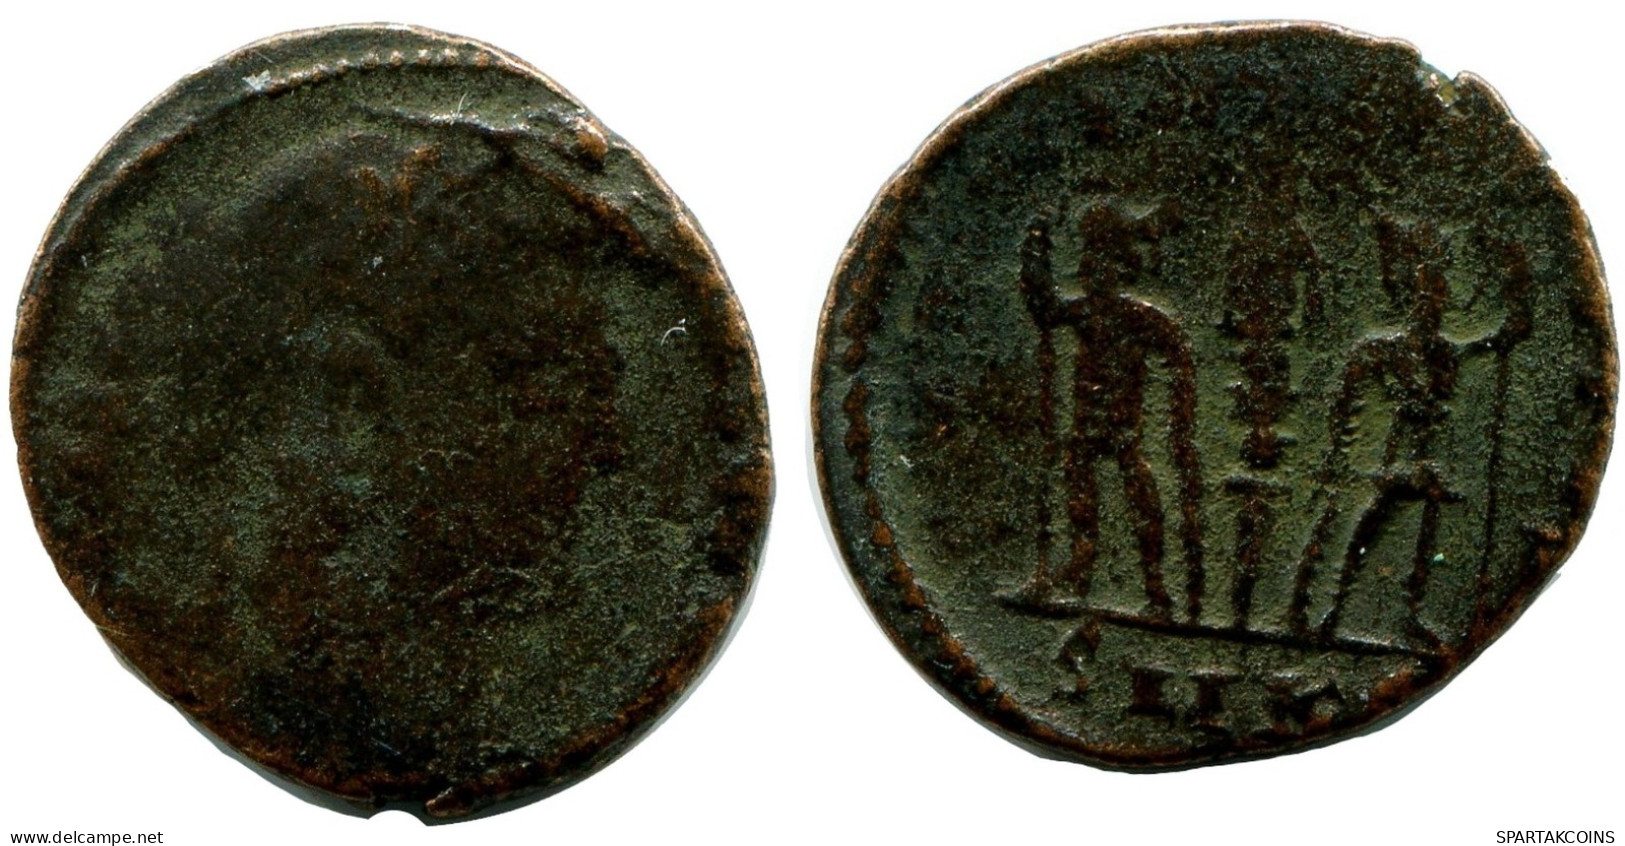 ROMAN Pièce MINTED IN CYZICUS FOUND IN IHNASYAH HOARD EGYPT #ANC11049.14.F.A - El Impero Christiano (307 / 363)